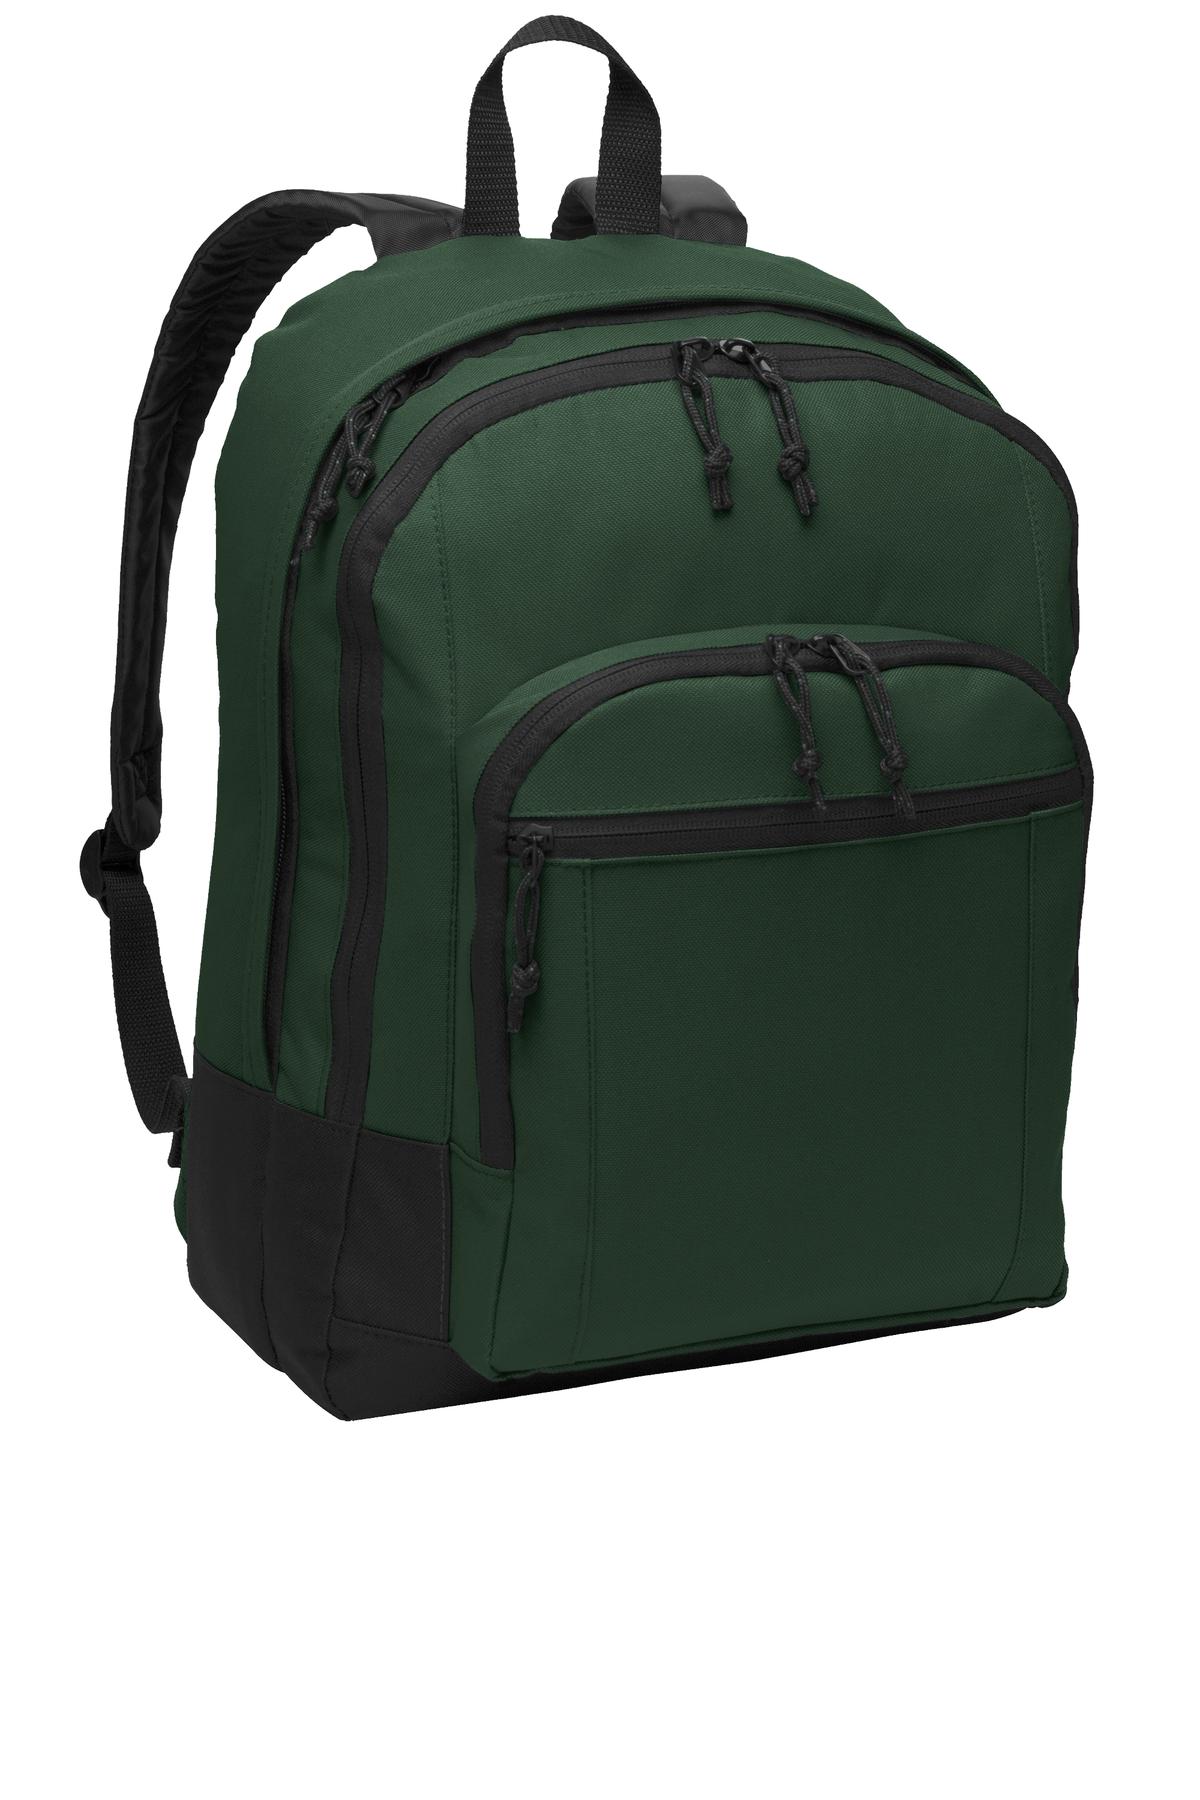 Photo of Port Authority Bags BG204  color  Forest Green